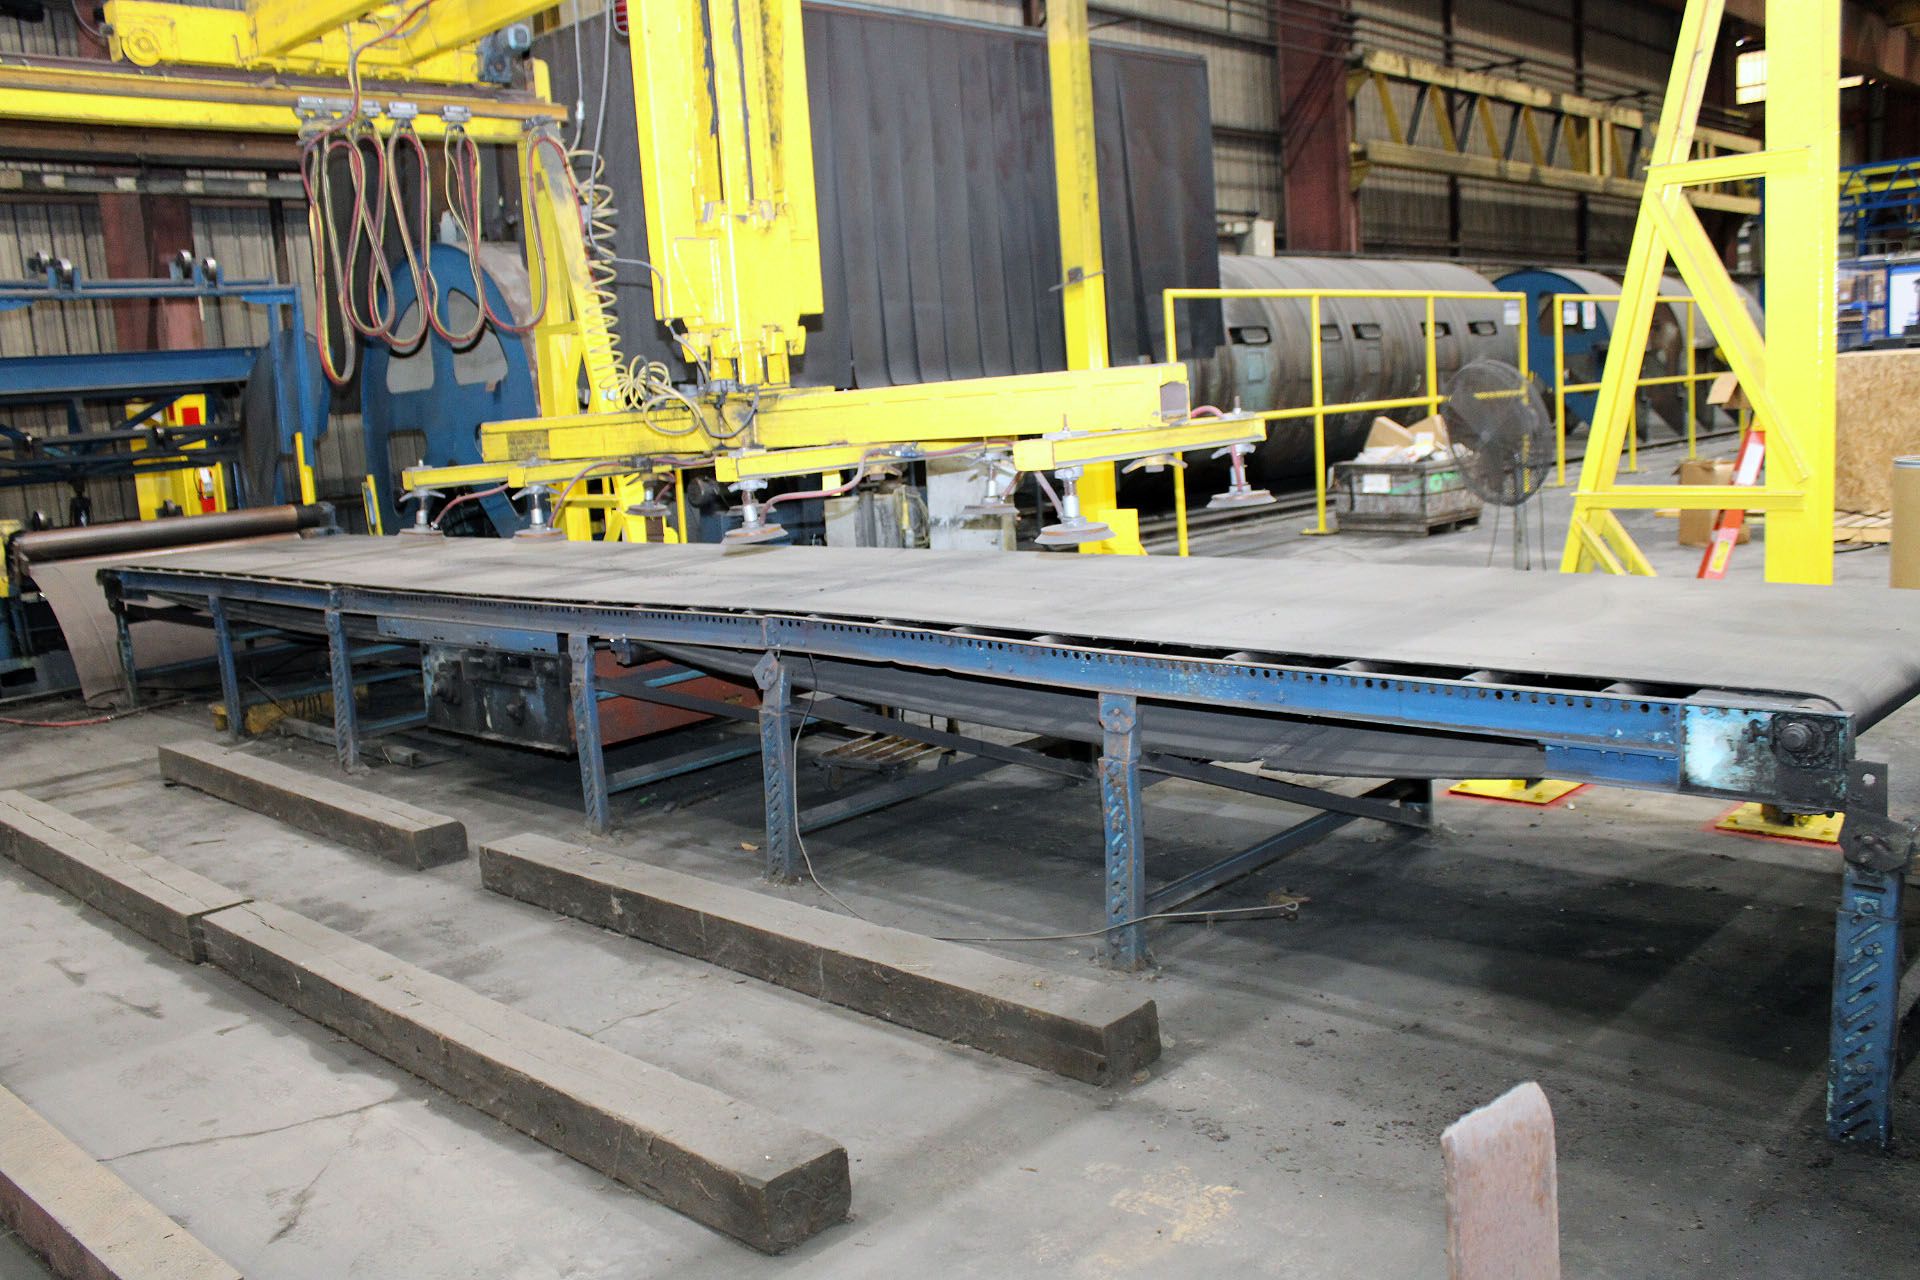 BELT CONVEYOR SYSTEM, ROACH MANUFACTURING, 54" WIDE X 31' LONG, ADJUSTABLE HEIGHT